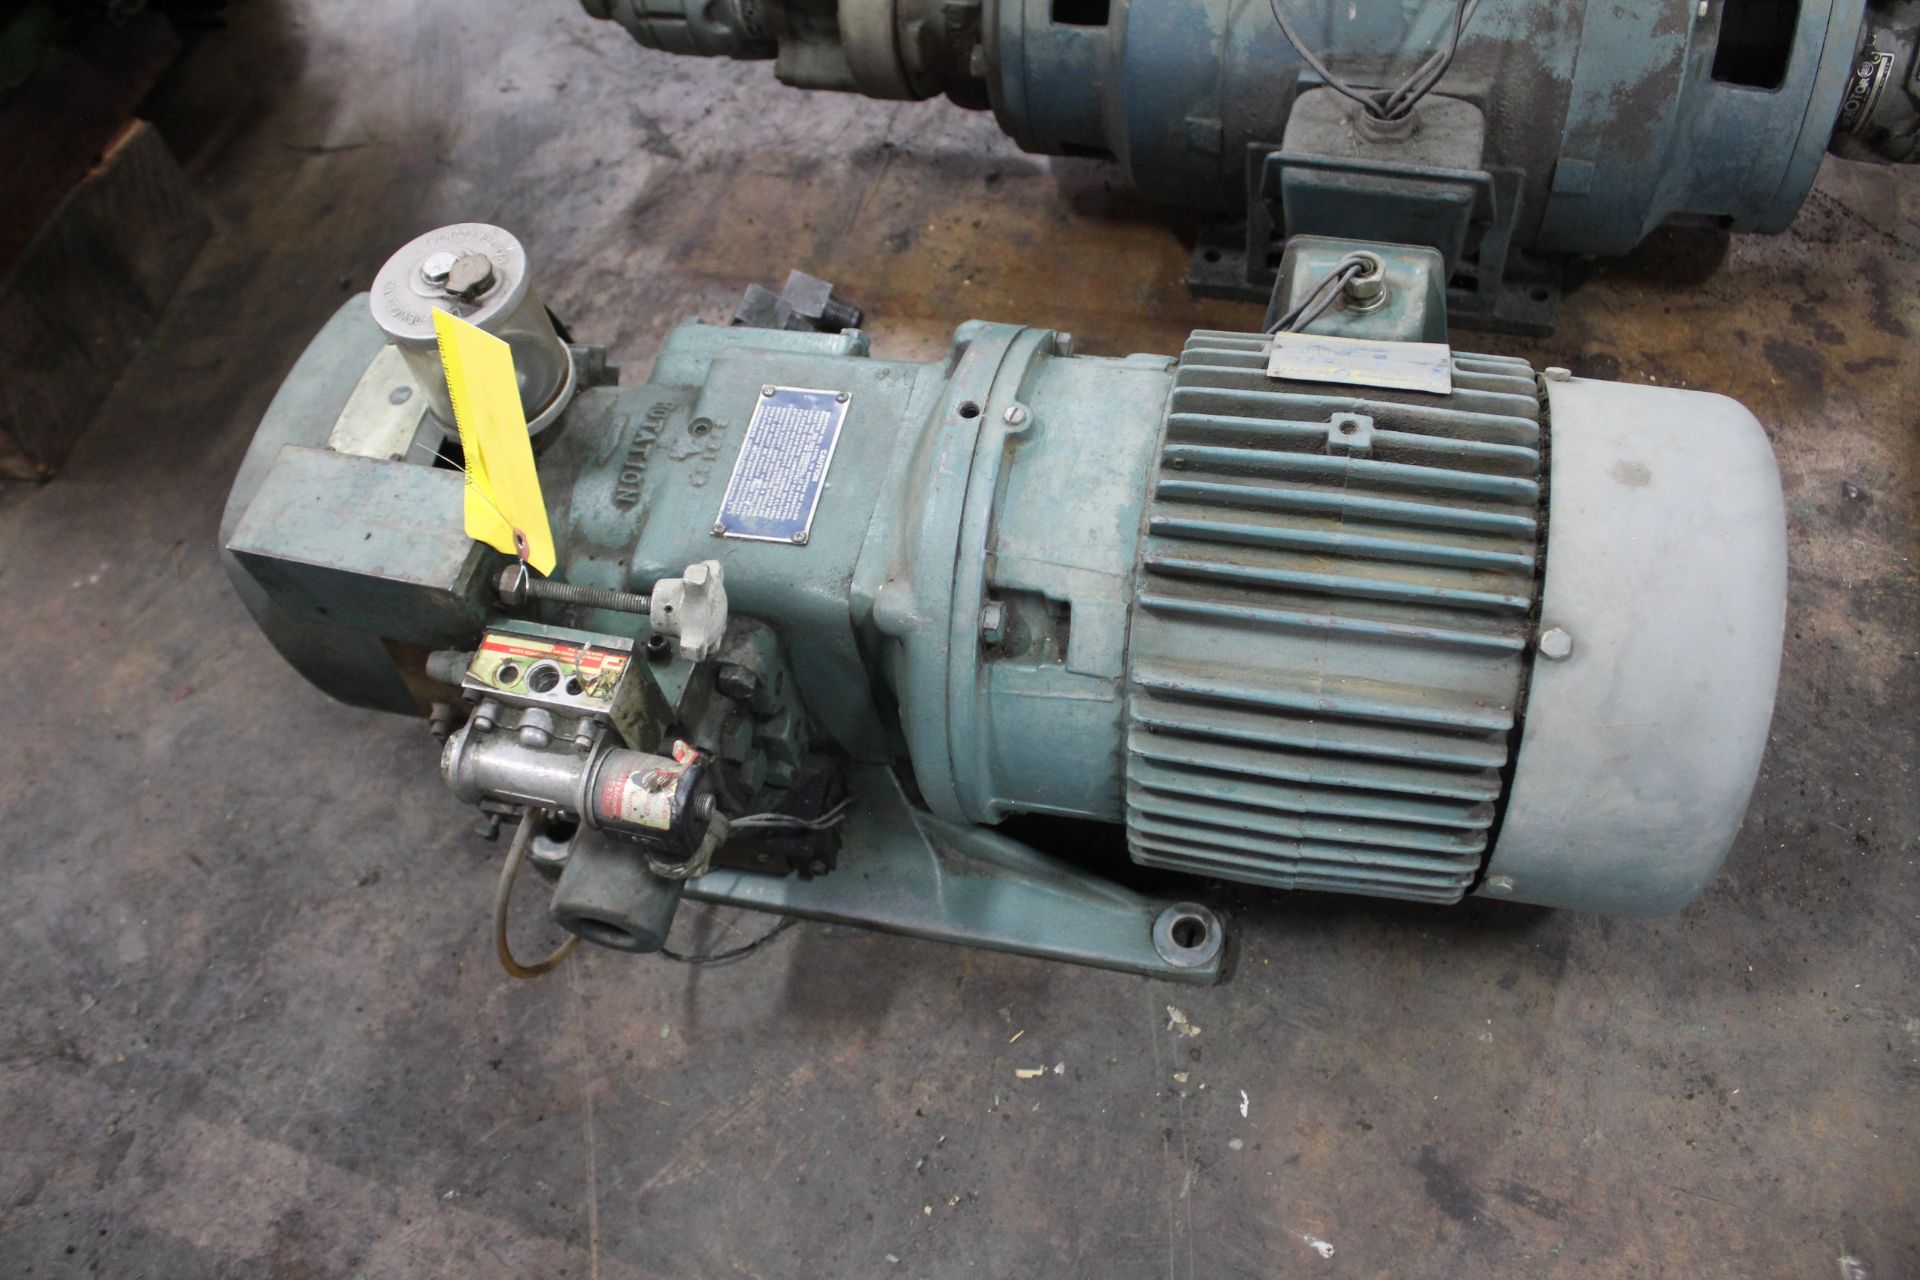 VICKERS HYDRAULIC PUMP, WITH MARATHON ELECTRIC 7-1/2 HP MOTOR, ADJUSTABLE SPEED DRIVE - Image 2 of 2